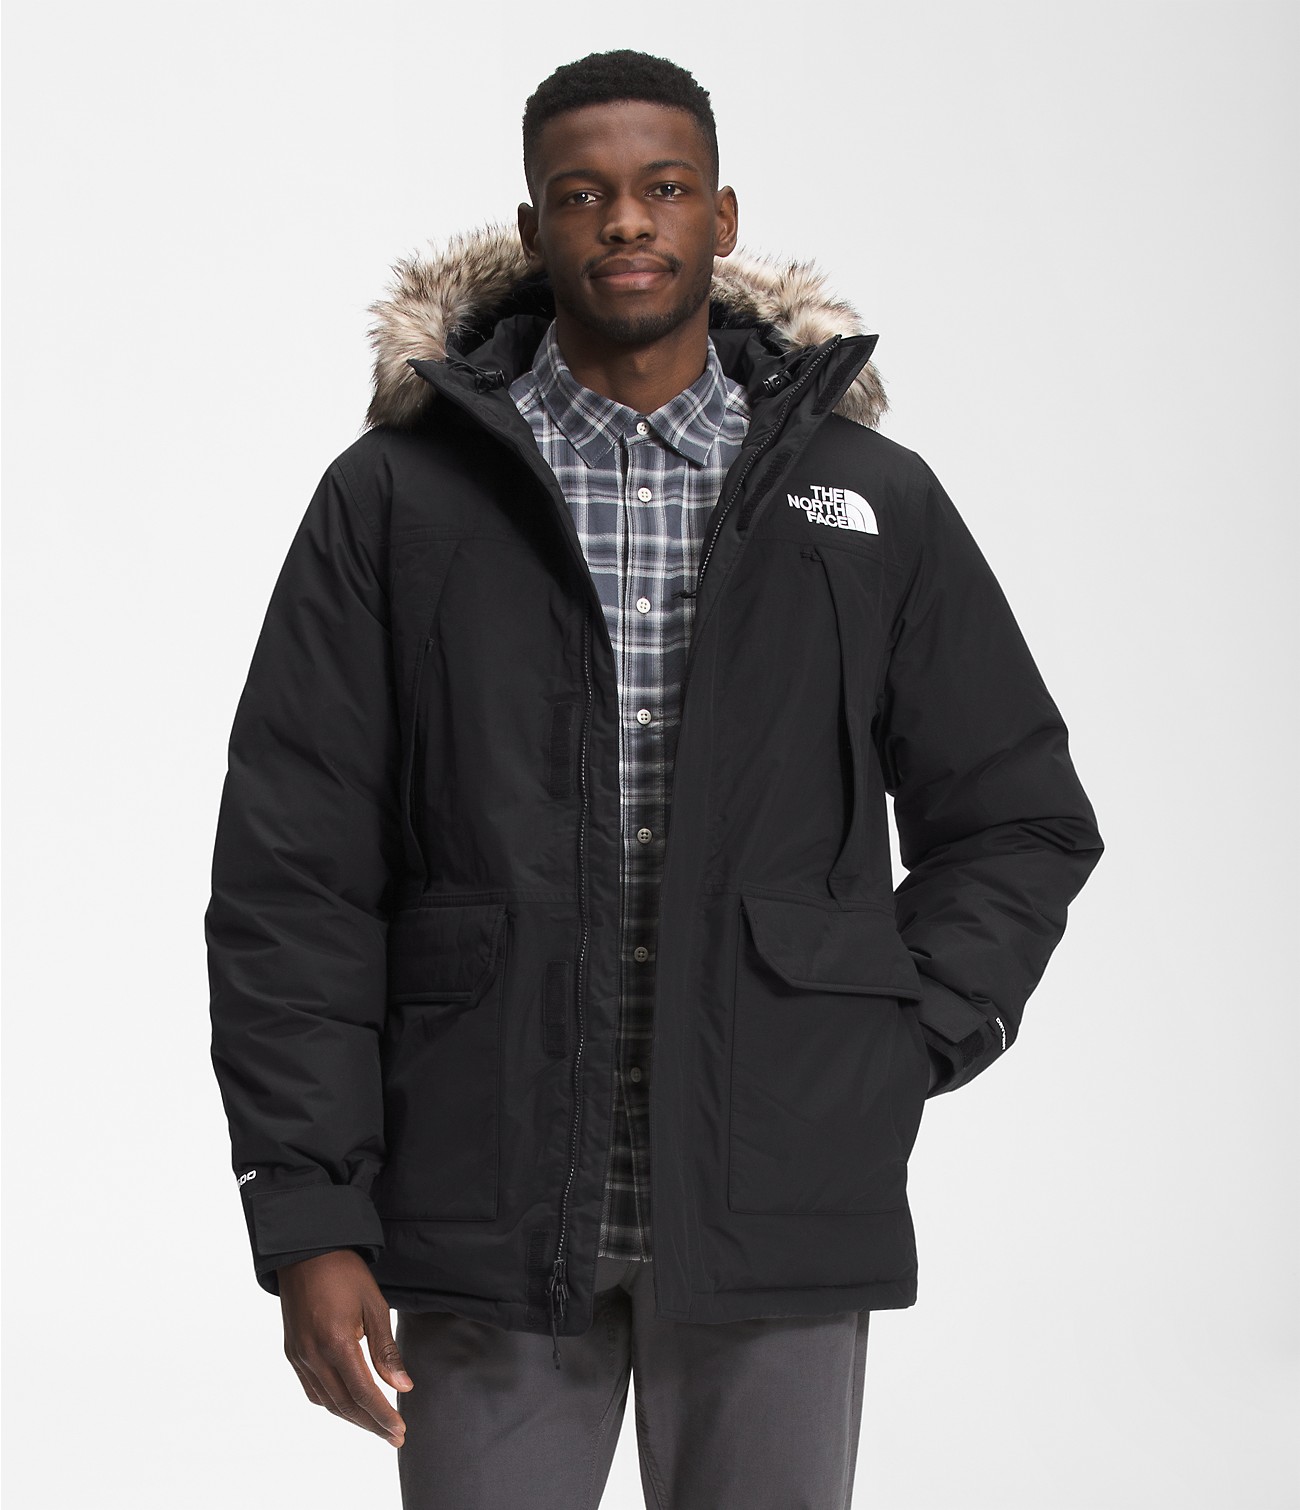 Unlock Wilderness' choice in the Canada Goose Vs North Face comparison, the McMurdo Parka by The North Face